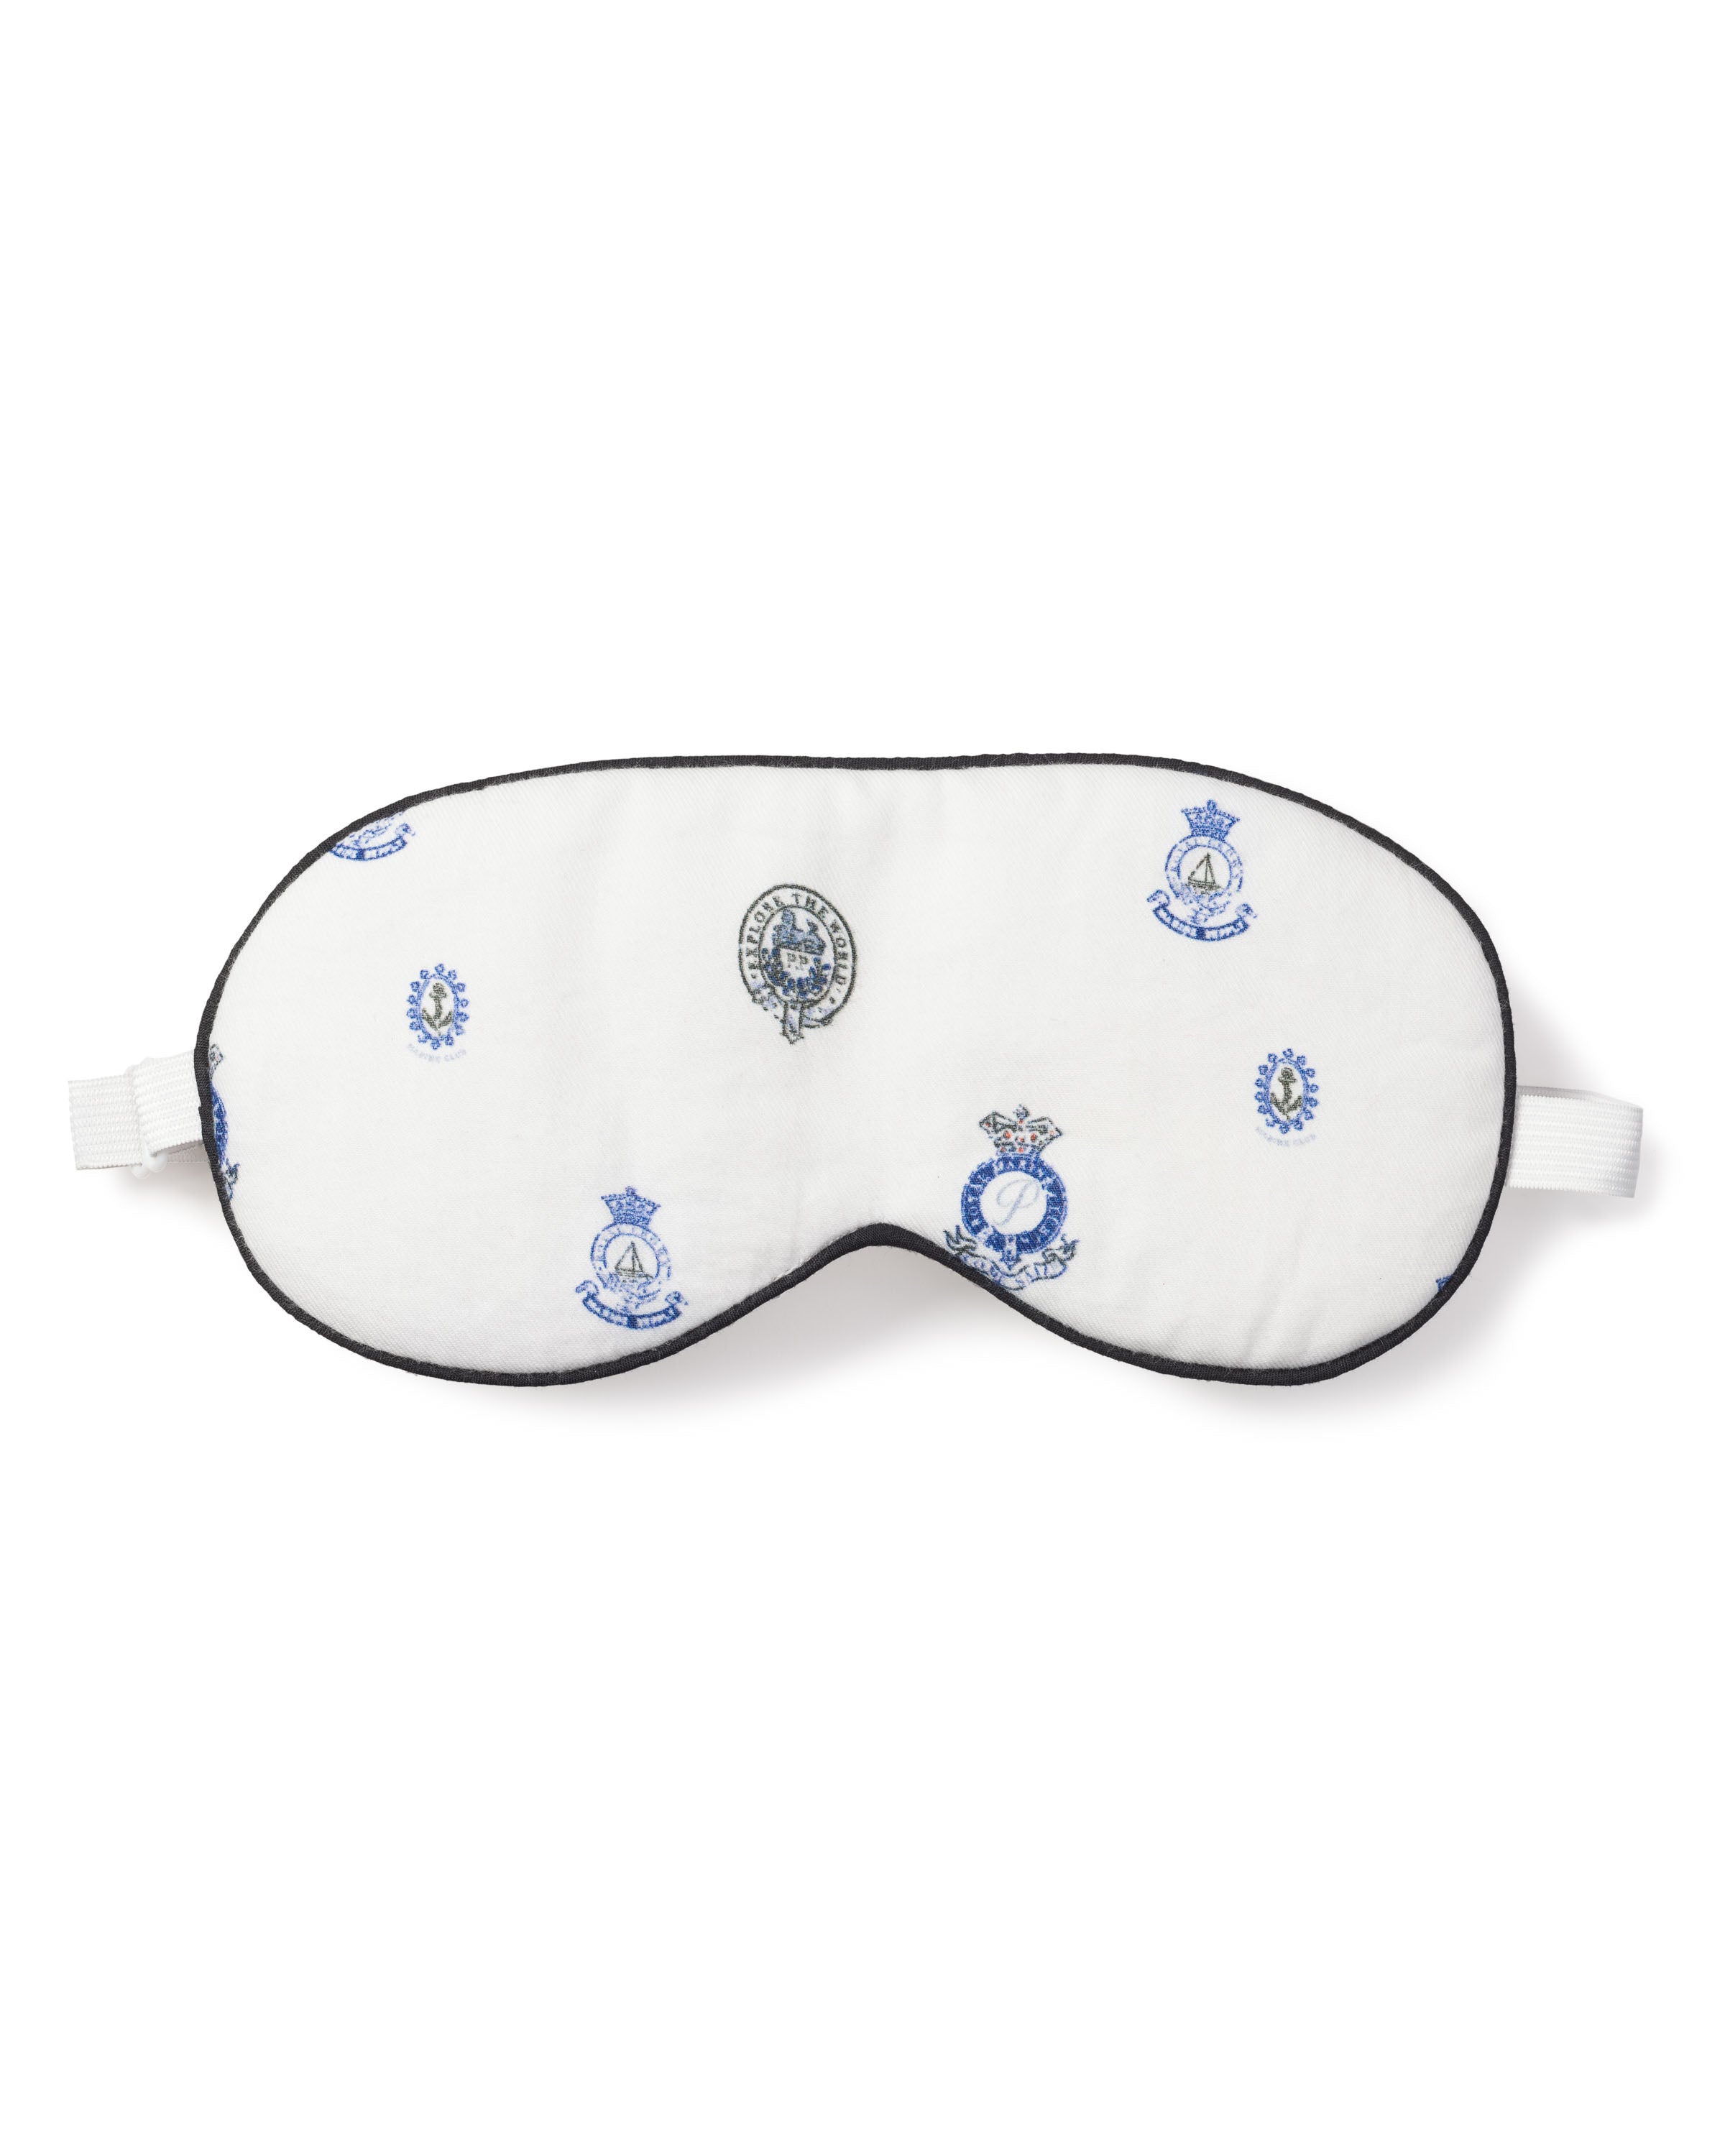 Adult's Sleep Mask in Regal Crests